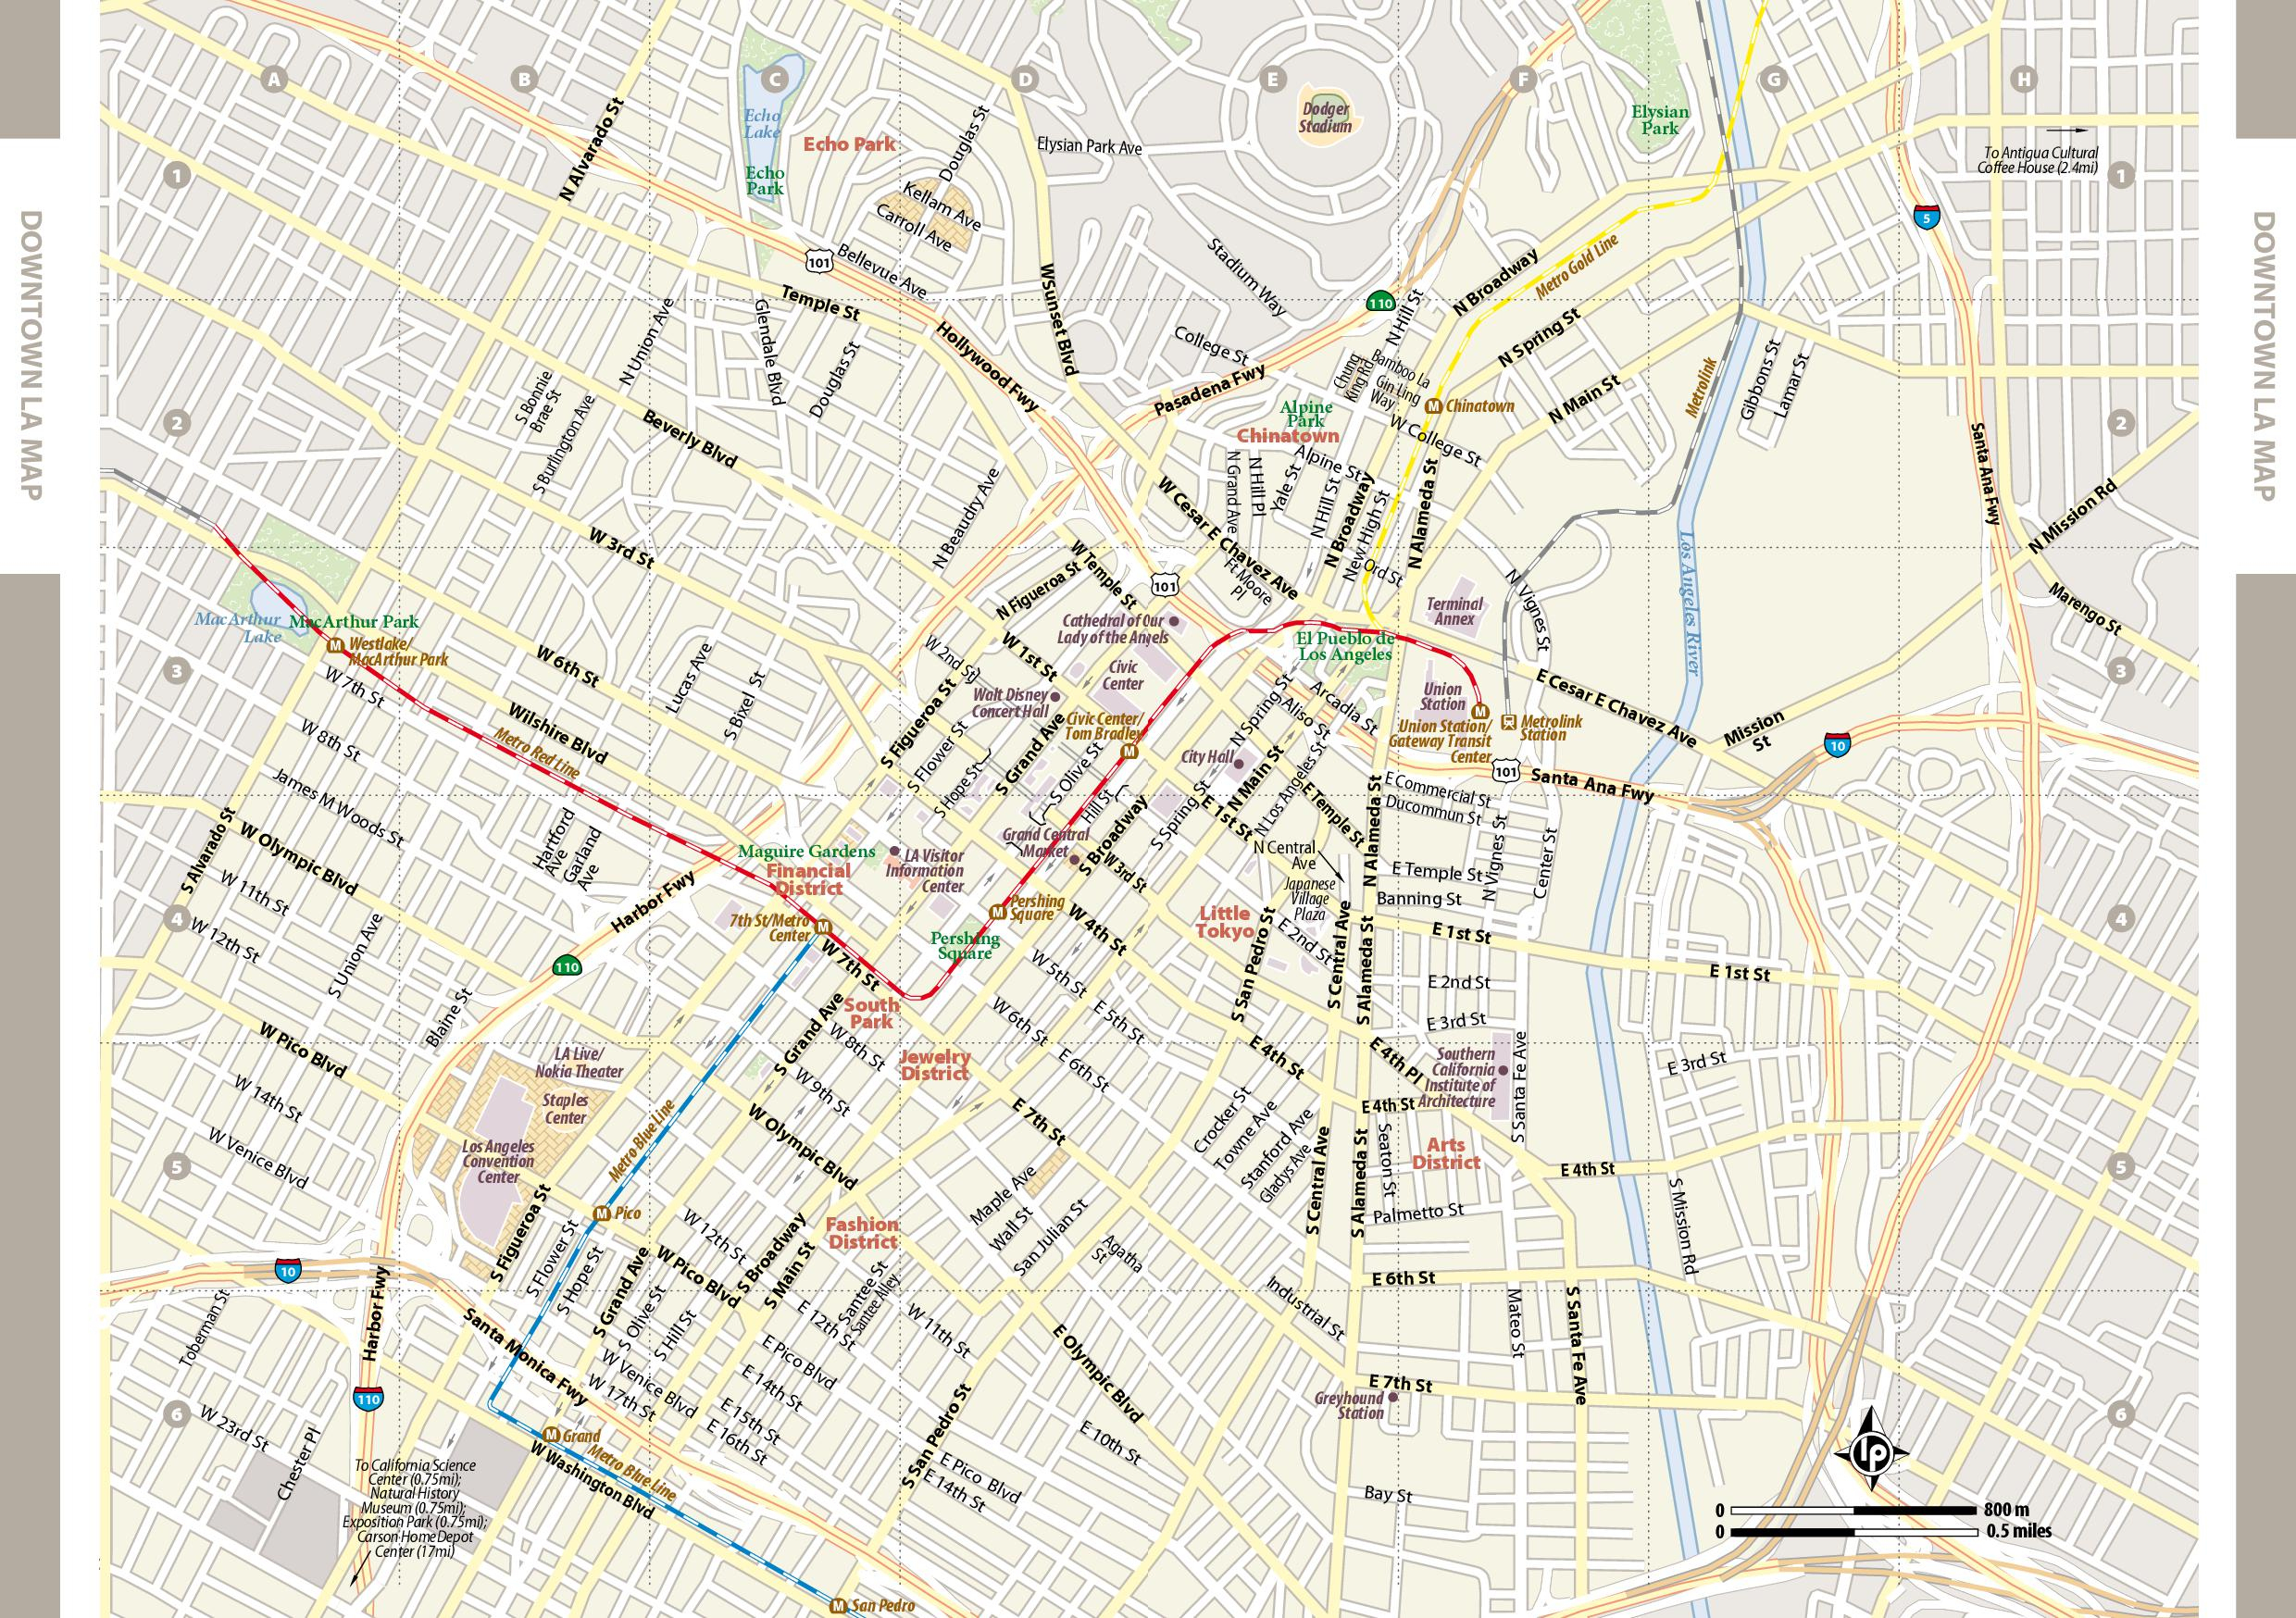 Large Los Angeles Maps For Free Download And Print | High-Resolution - Los Angeles Tourist Map Printable